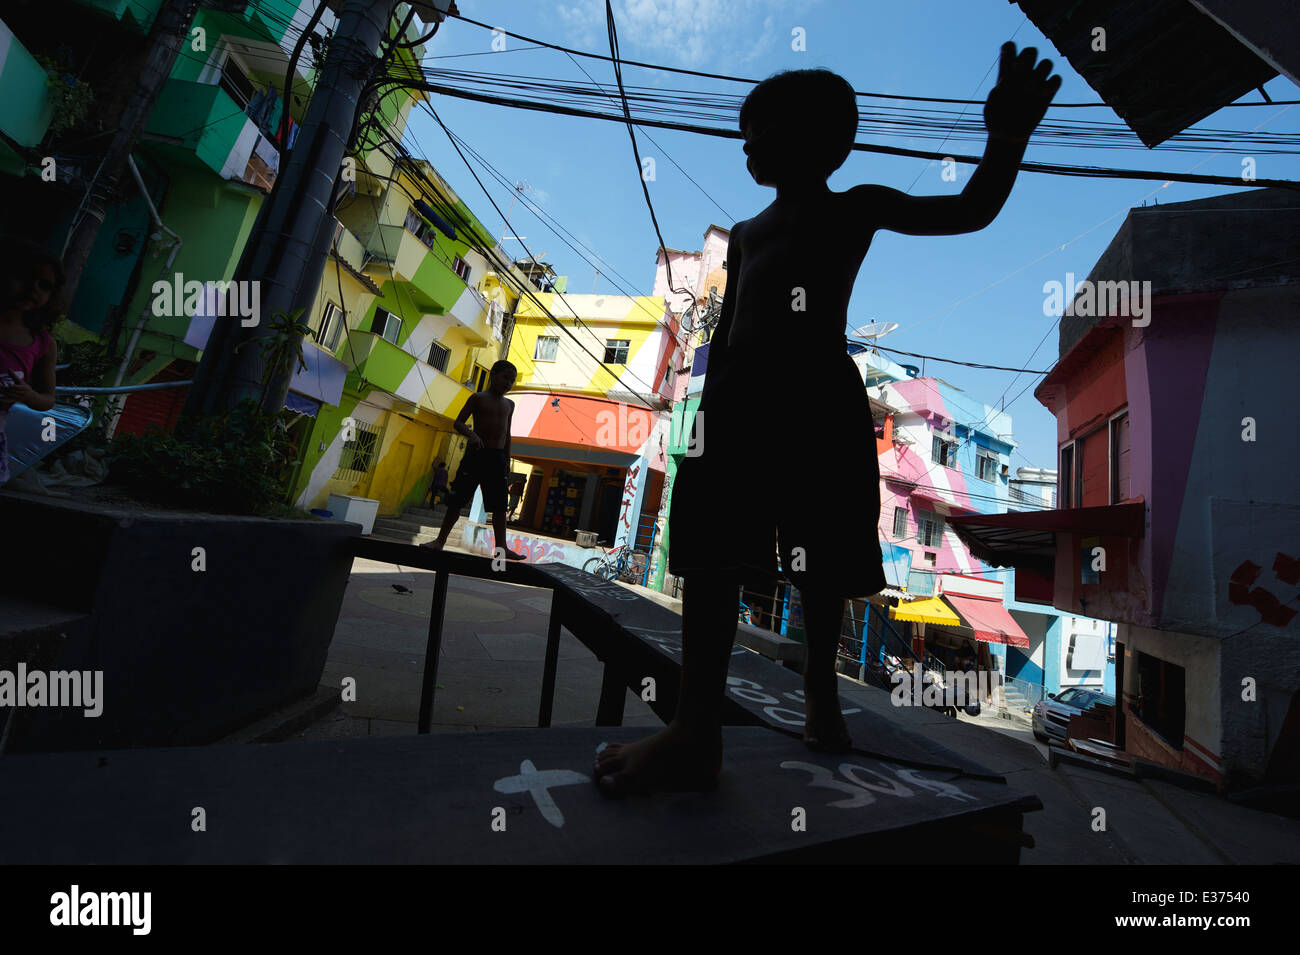 RIO DE JANEIRO, BRAZIL - FEBRUARY 14, 2014: Silhouettes of children play at colorful painted buildings Favela Dona Marta Stock Photo